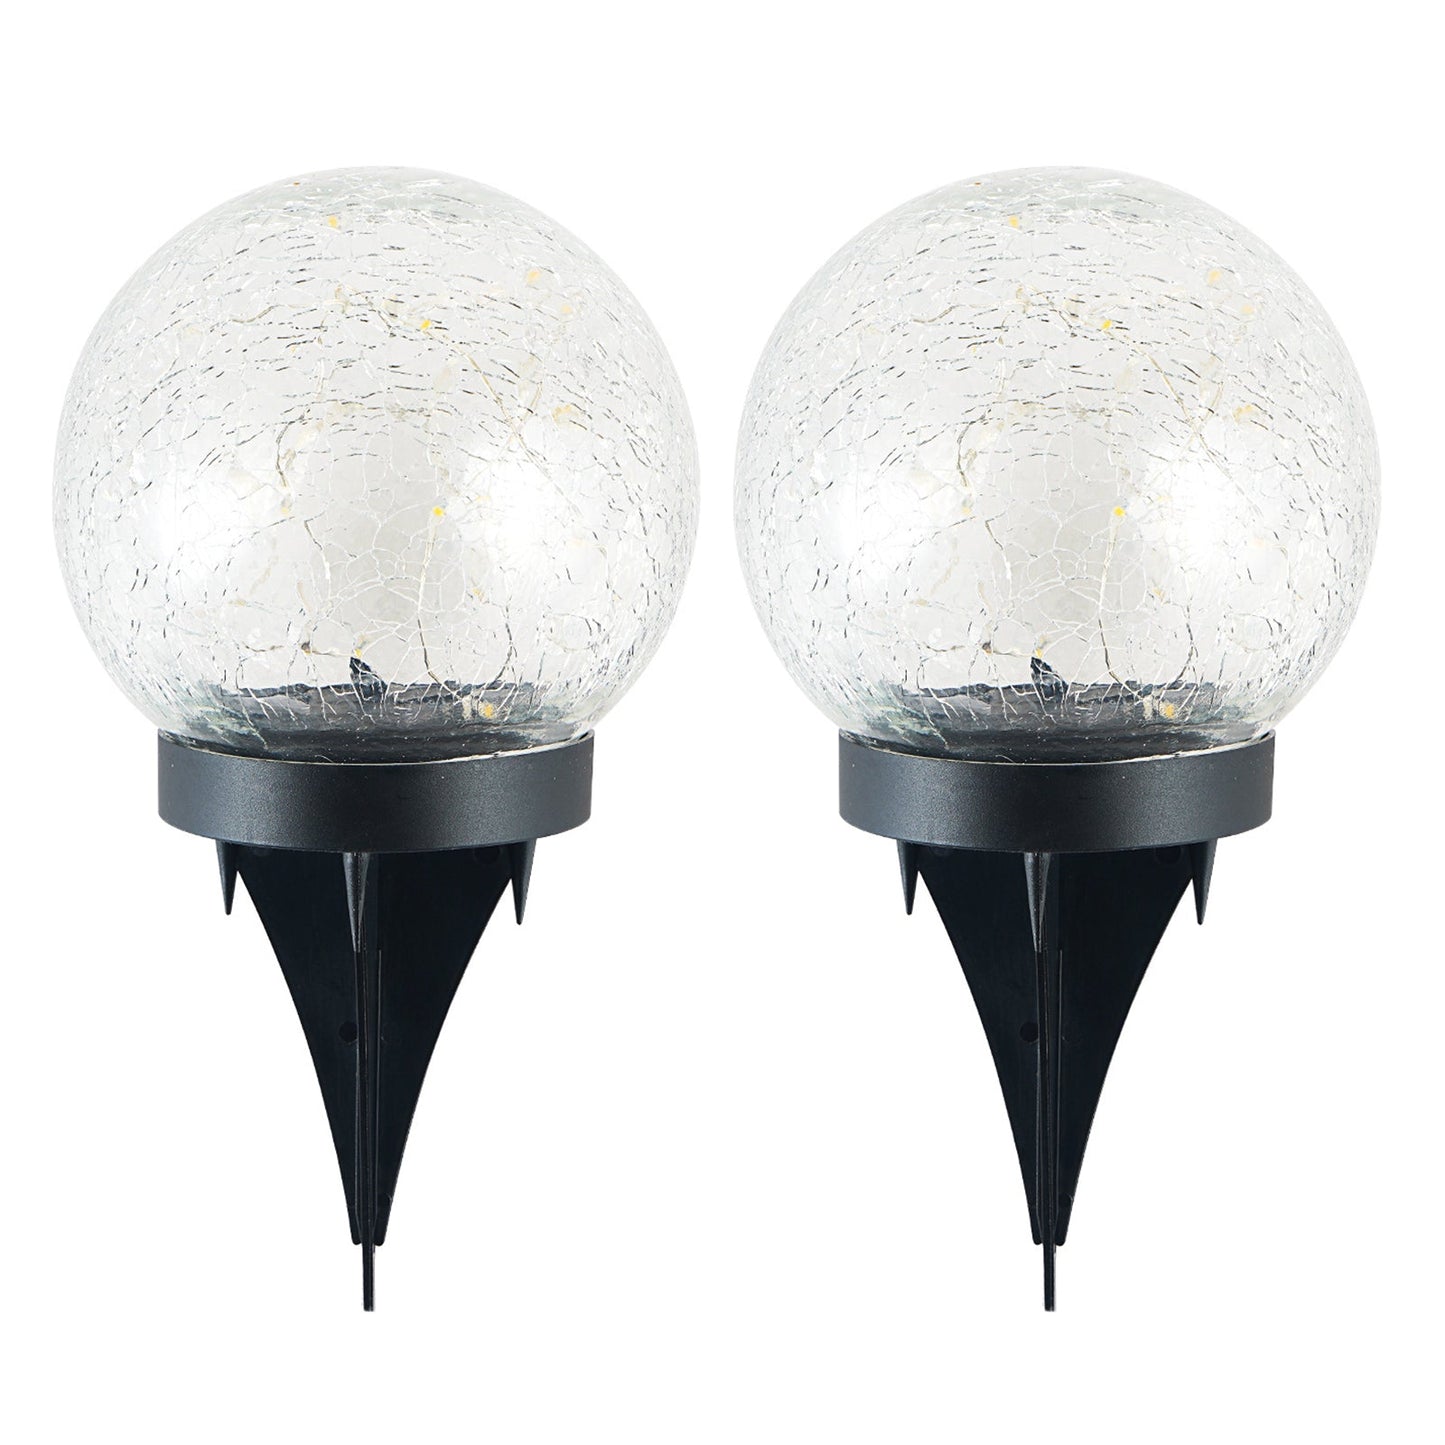 2 Piece Solar Glass Ball With Cracked Appearance